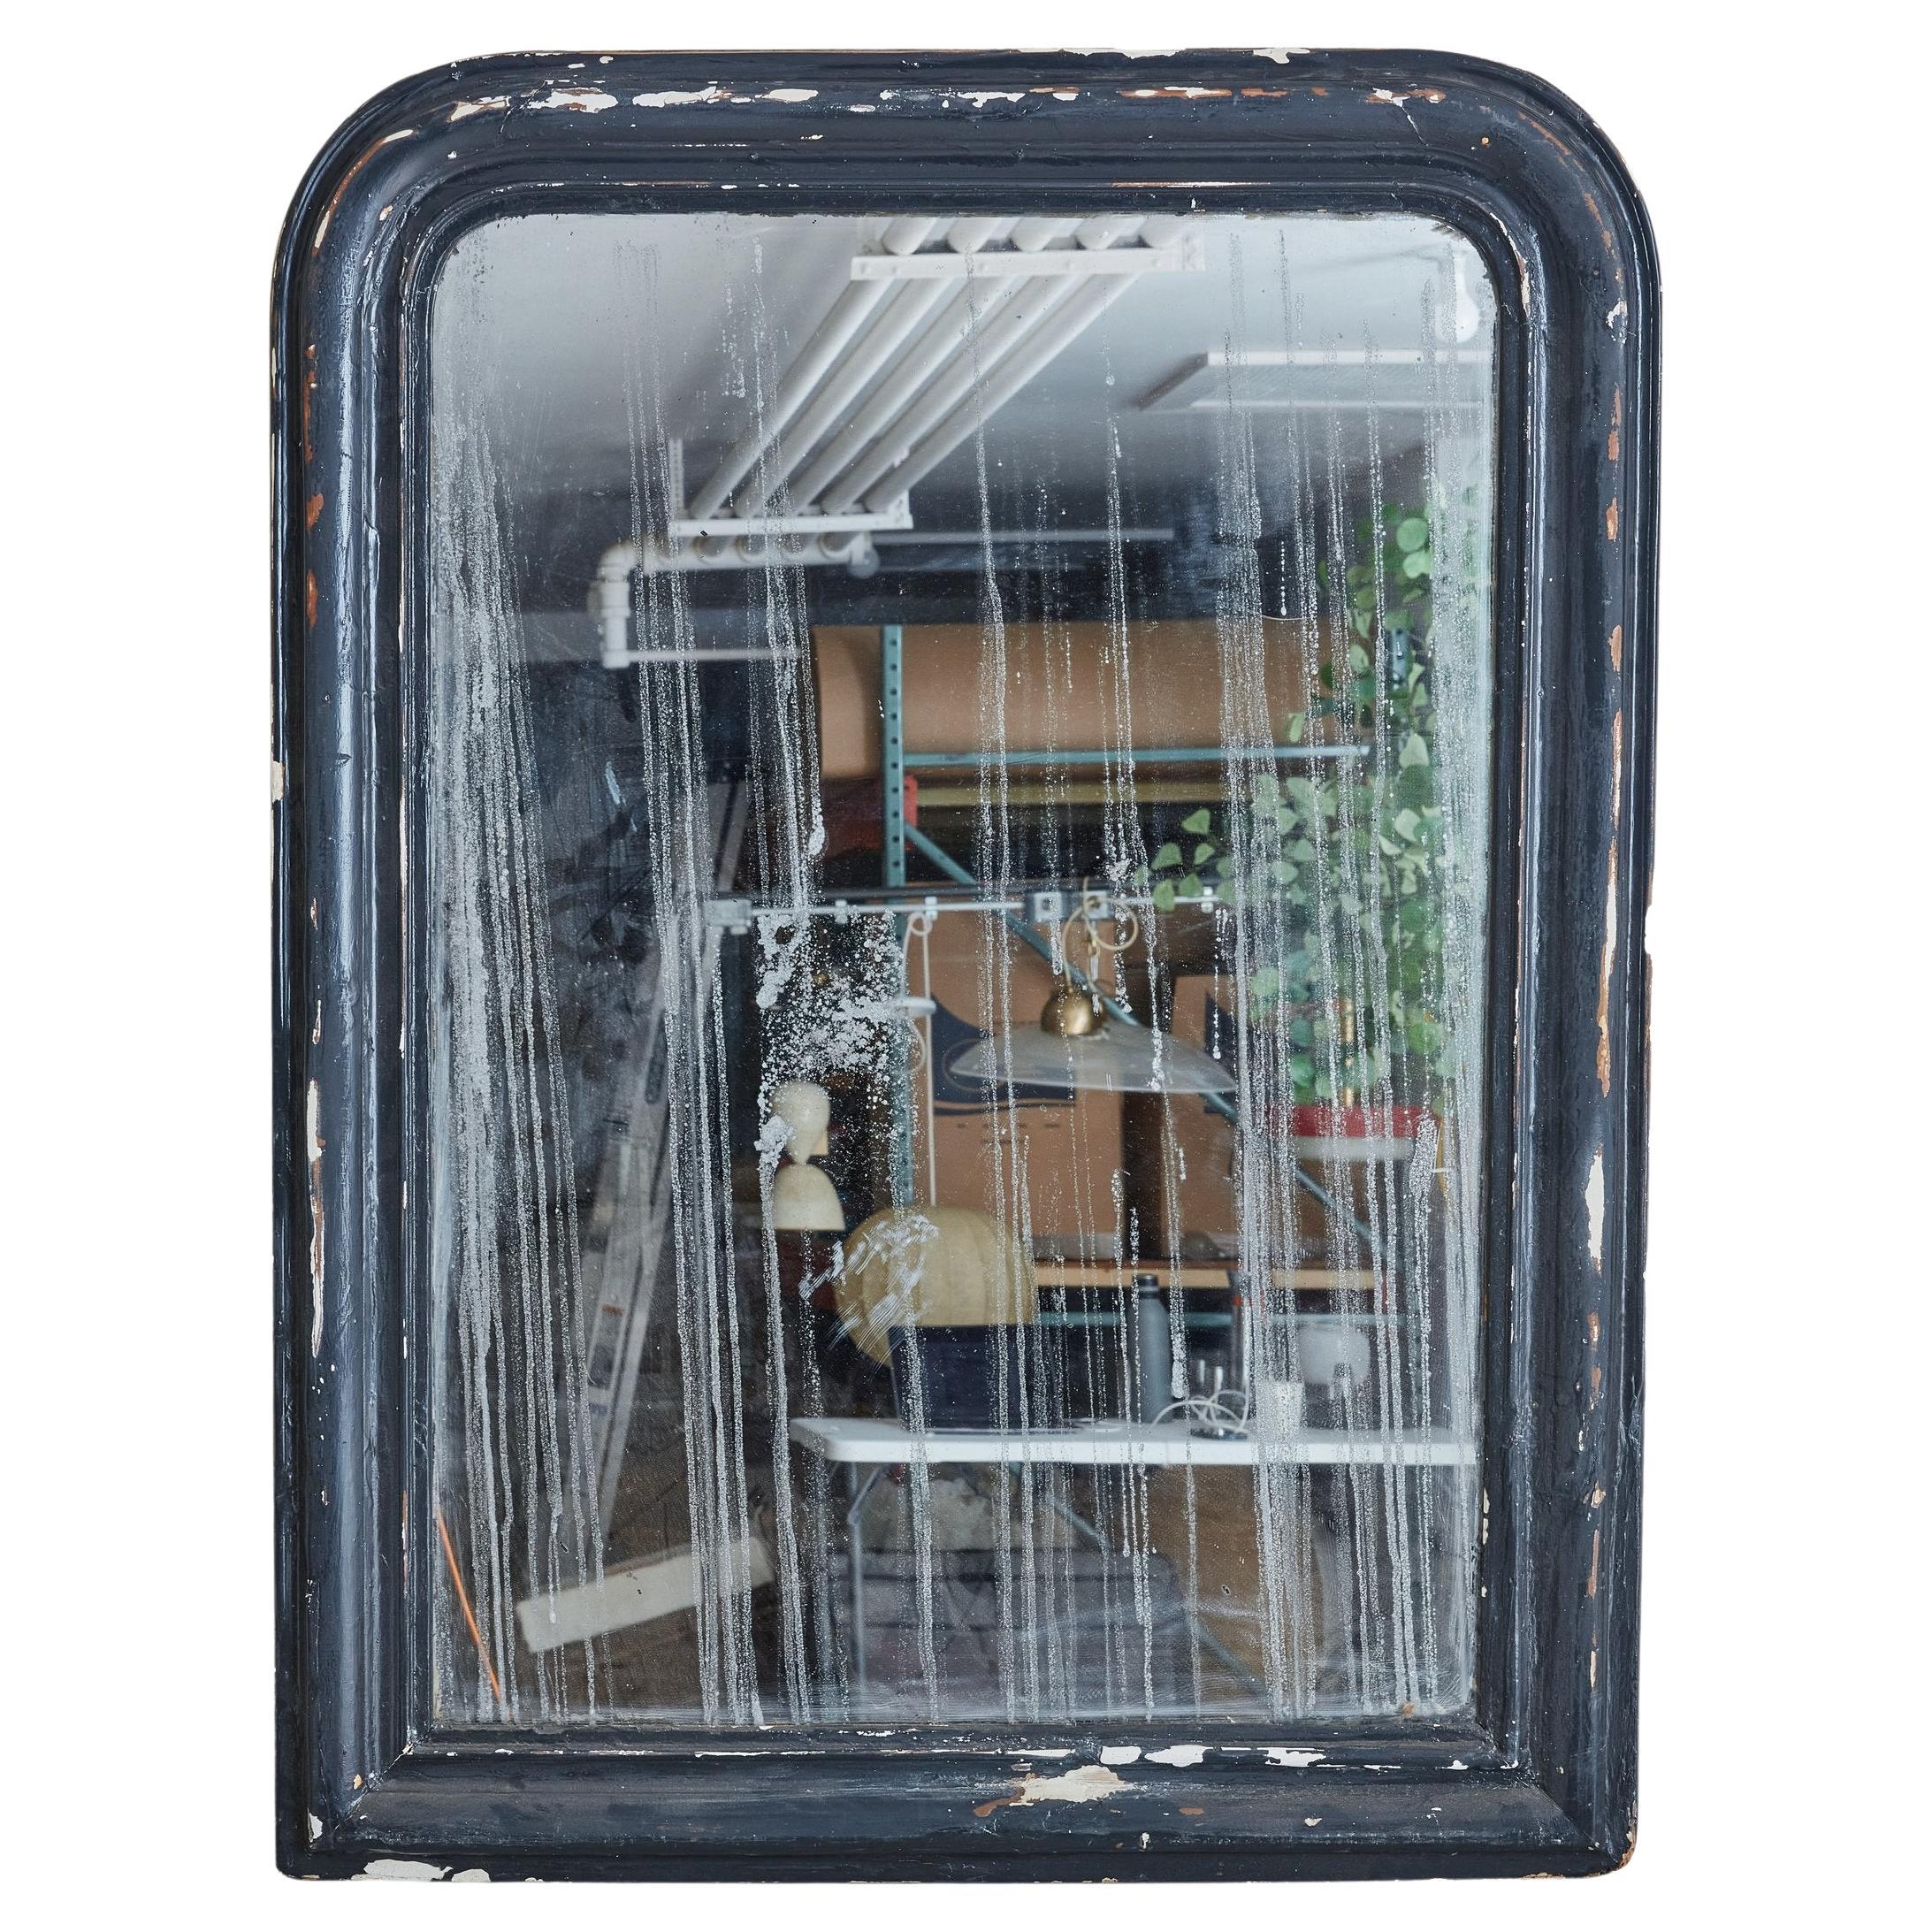 A gorgeous early 1900s antique mirror sourced in the South of France. Featuring a black wood frame + a heavily oxidized mirror, this is a piece that immediately brings depth to a space. 
 

DIMENSIONS: 36